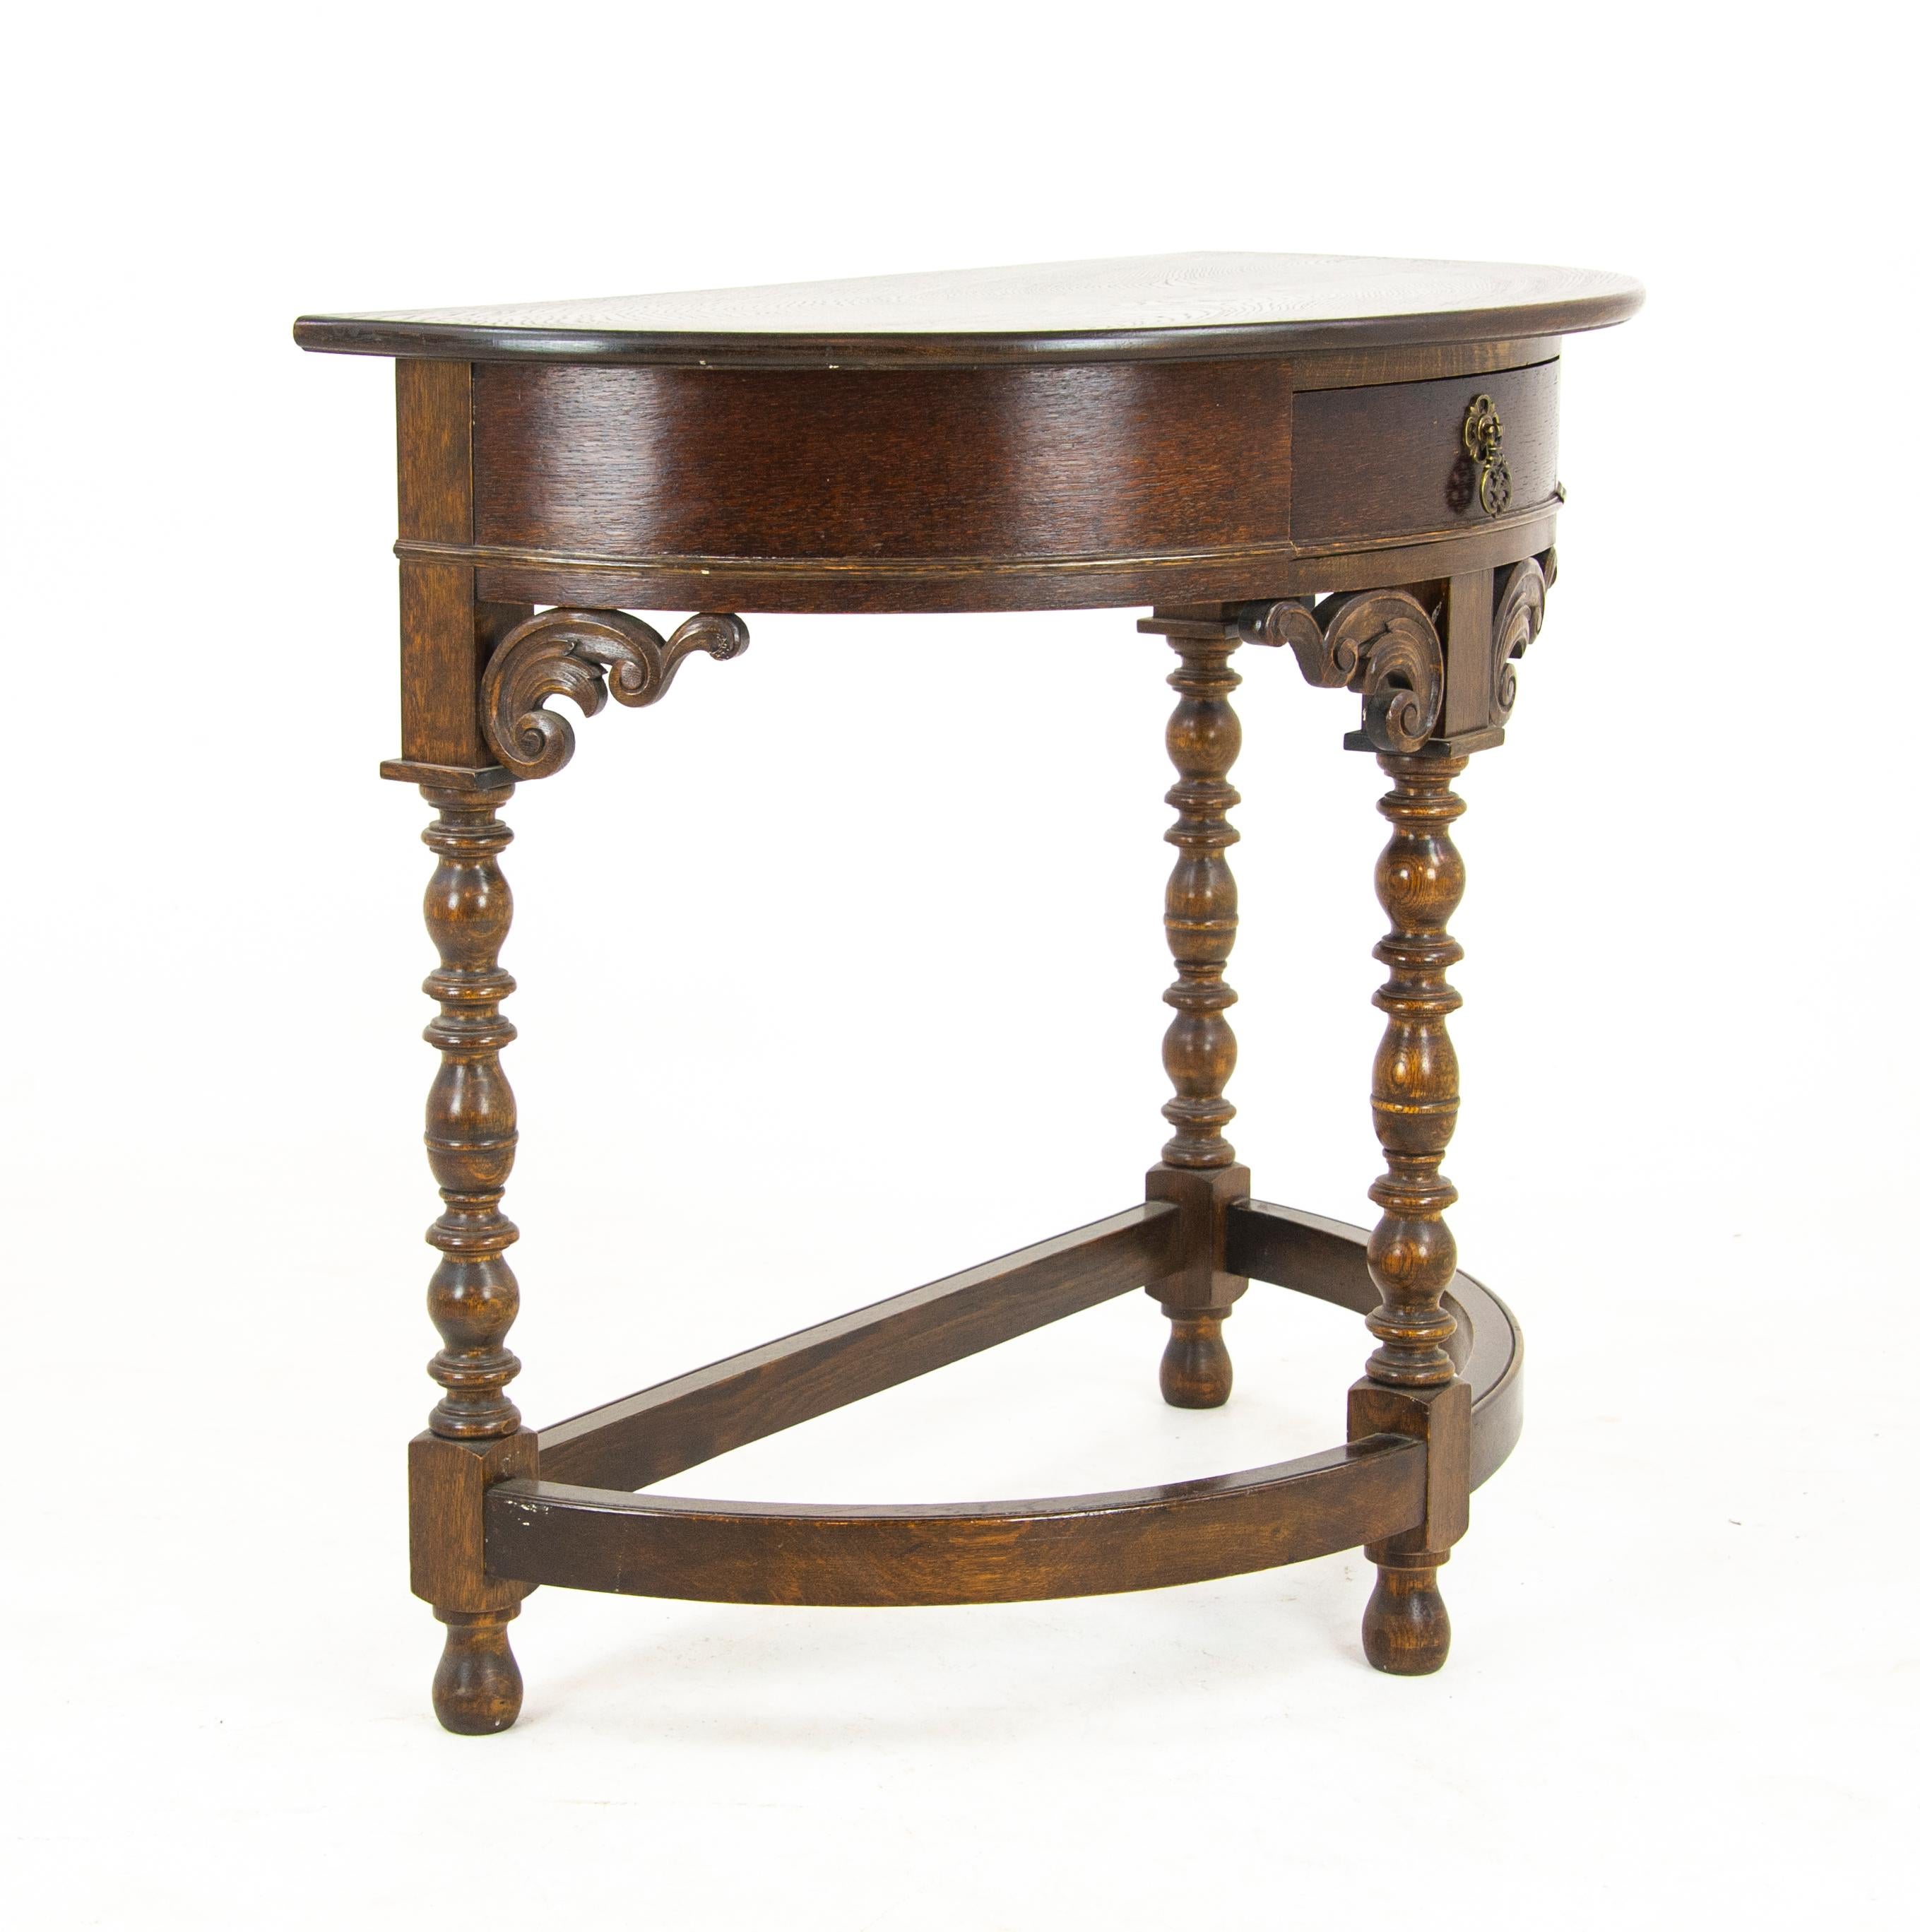 Carved Oak Hall Table, DemiLune Table, Half Moon Table, Scotland 1920, Antique Furniture, B1173

Scotland 1920
Solid Oak with Original Finish
Bow Front Top
Carved Single Drawer with Original Brass Hardware
Turned Bobbin Legs
Ending with Curved